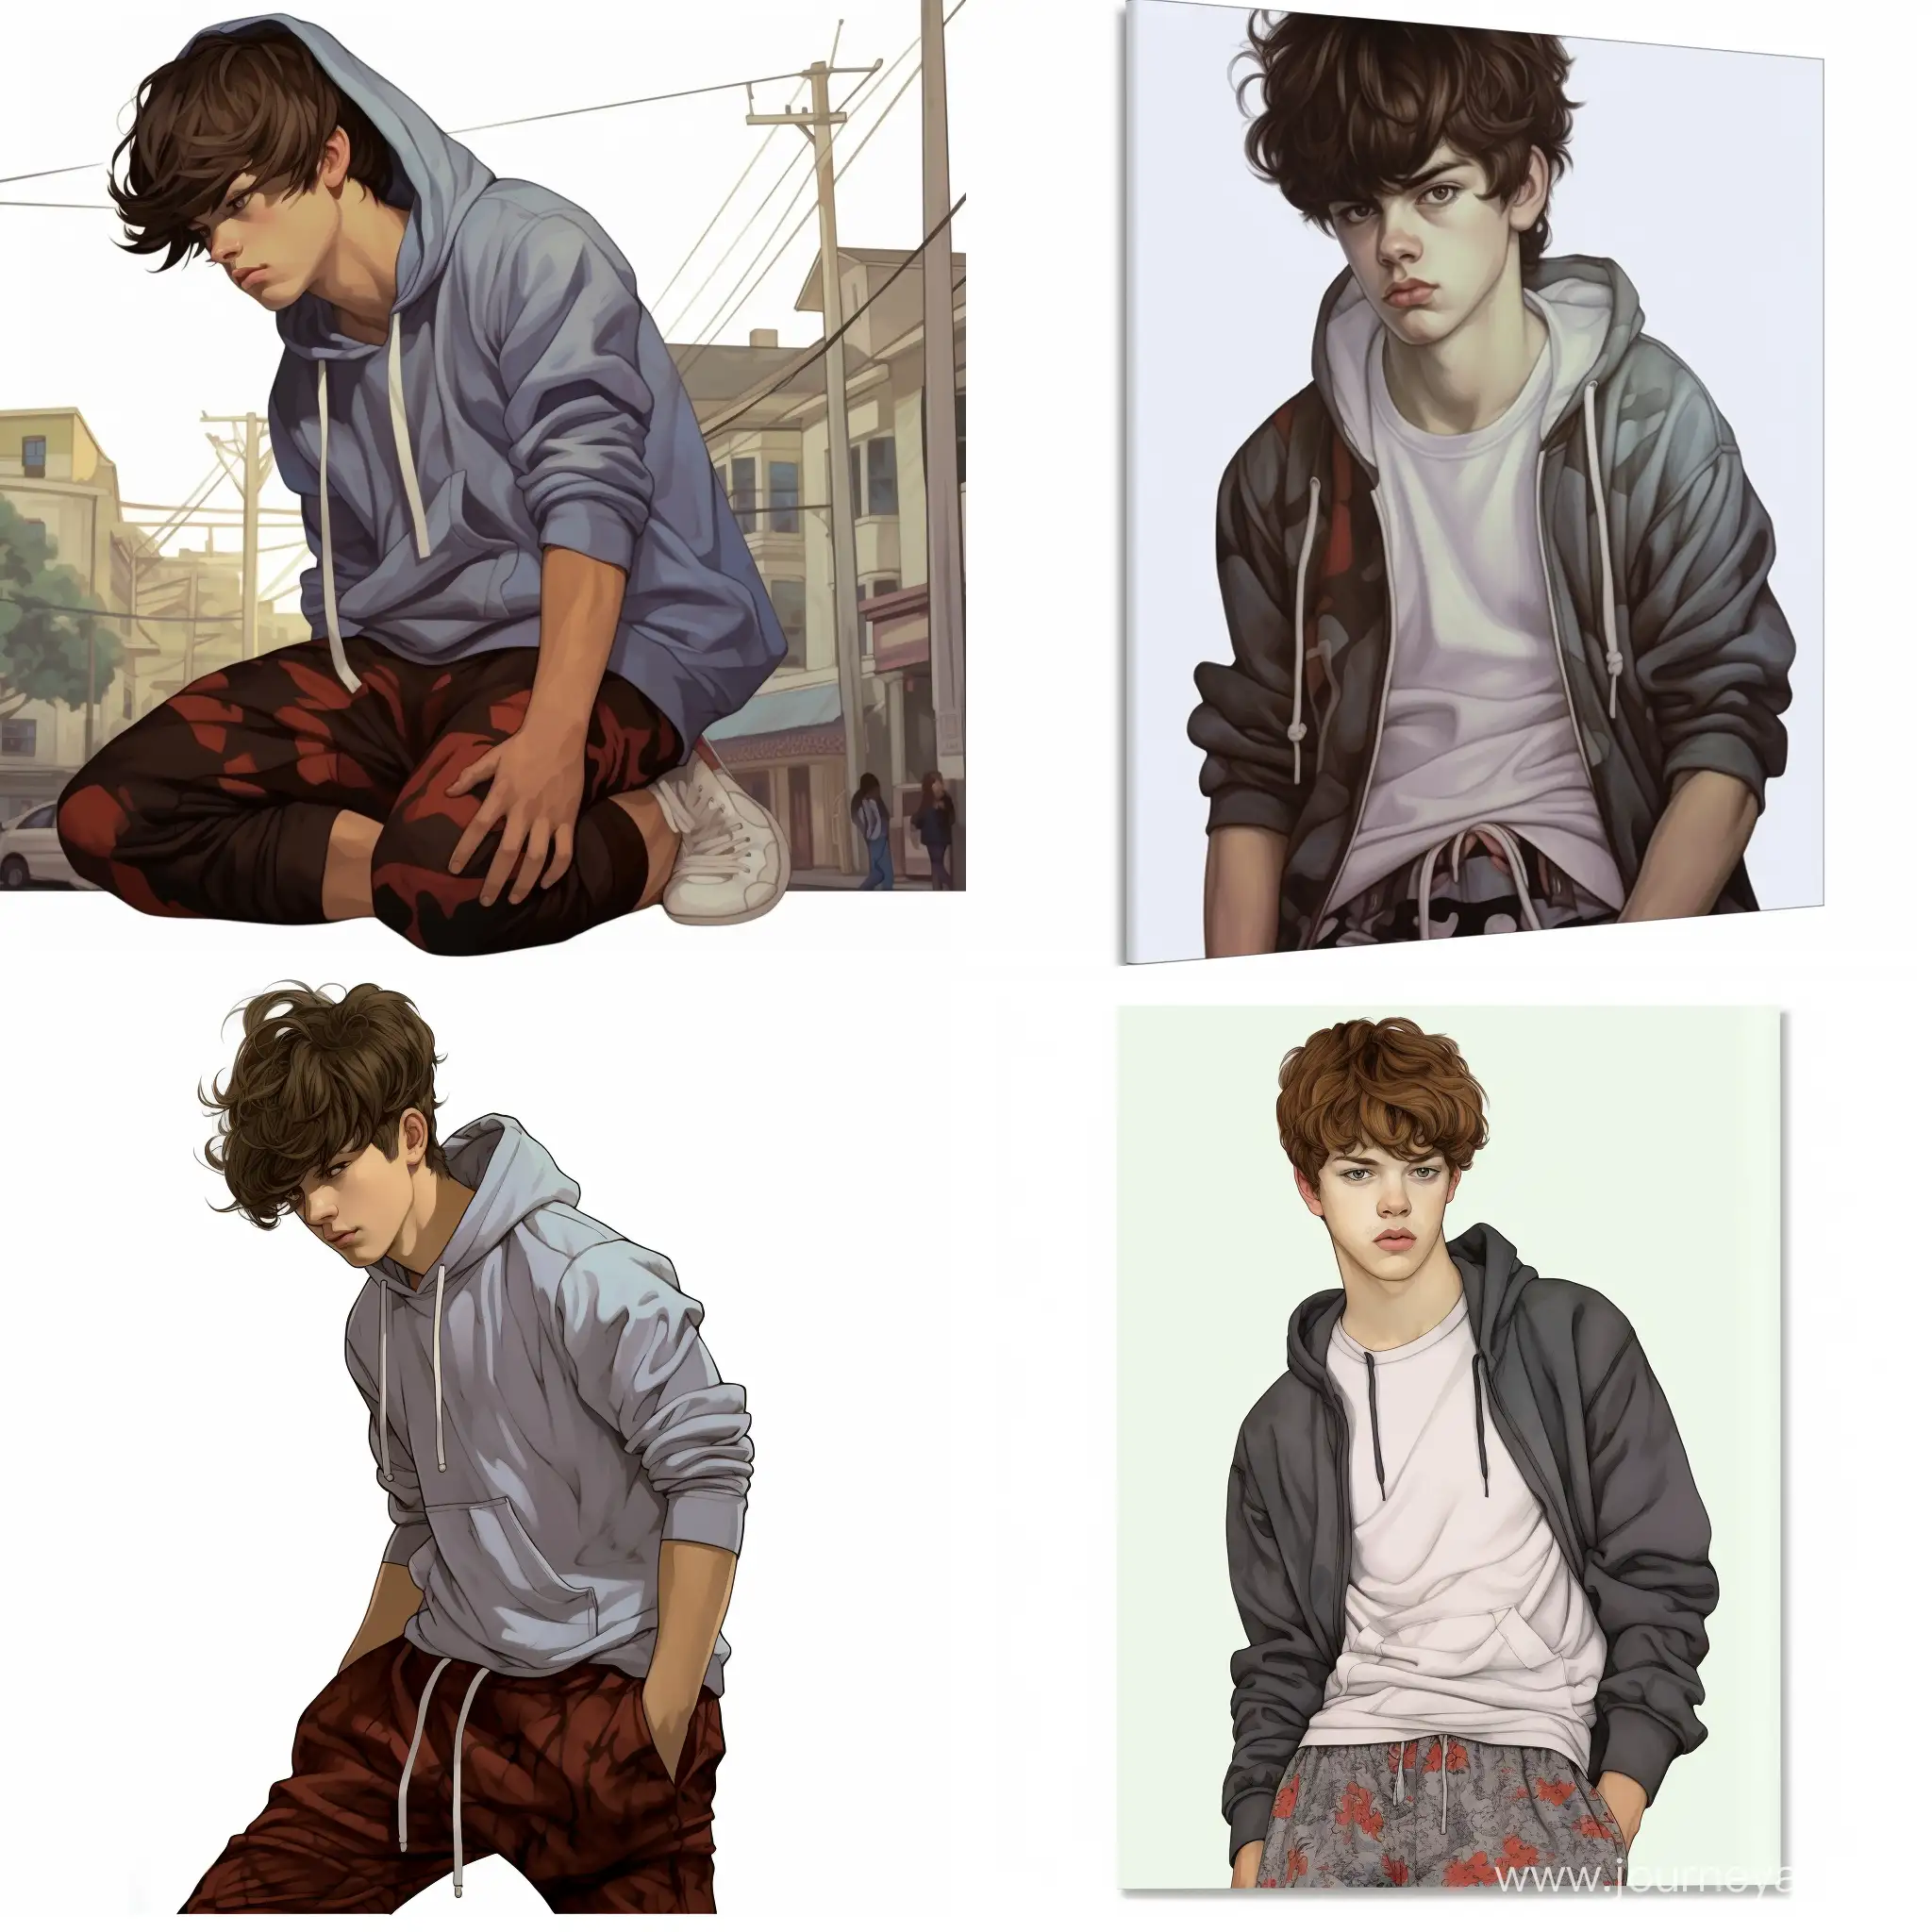 Casual-Teen-Boy-in-Sweatpants-Relaxed-Urban-Style-Portrait